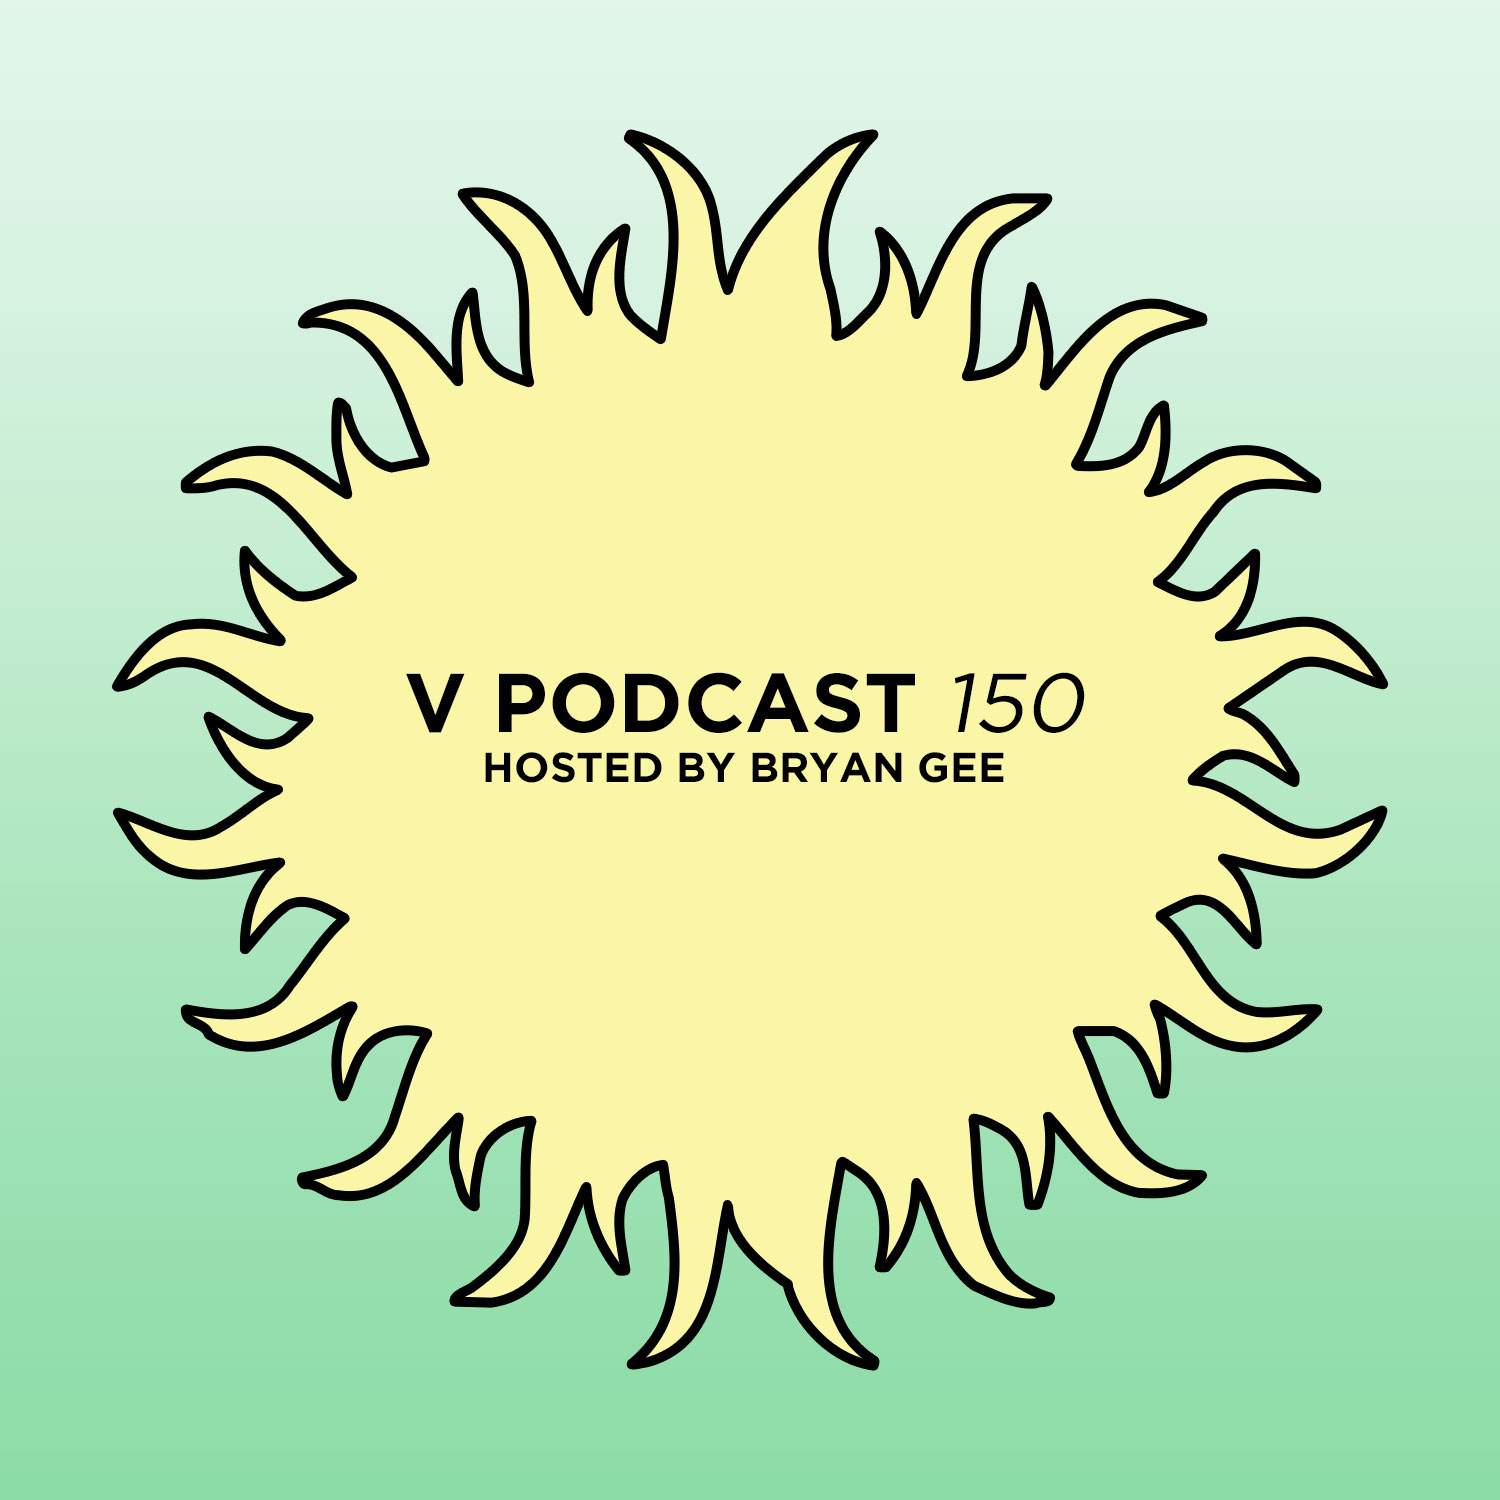 V Podcast 150 - Hosted by Bryan Gee Artwork